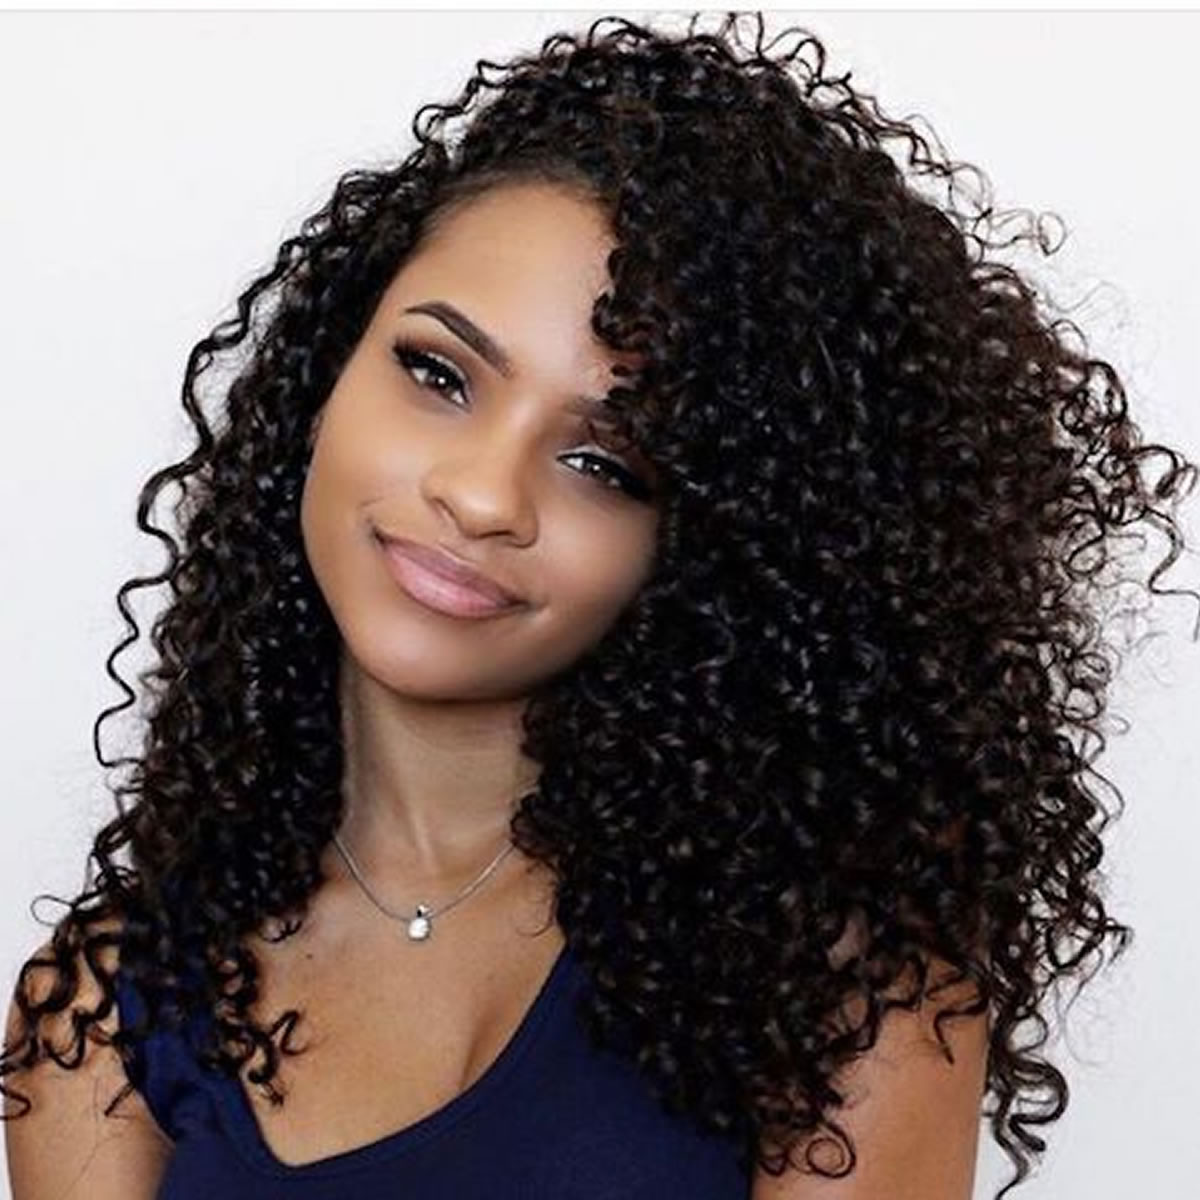 Curly Hairstyles For Black Women
 Black Women Medium Lenght Curly Hairstyles 2018 2019